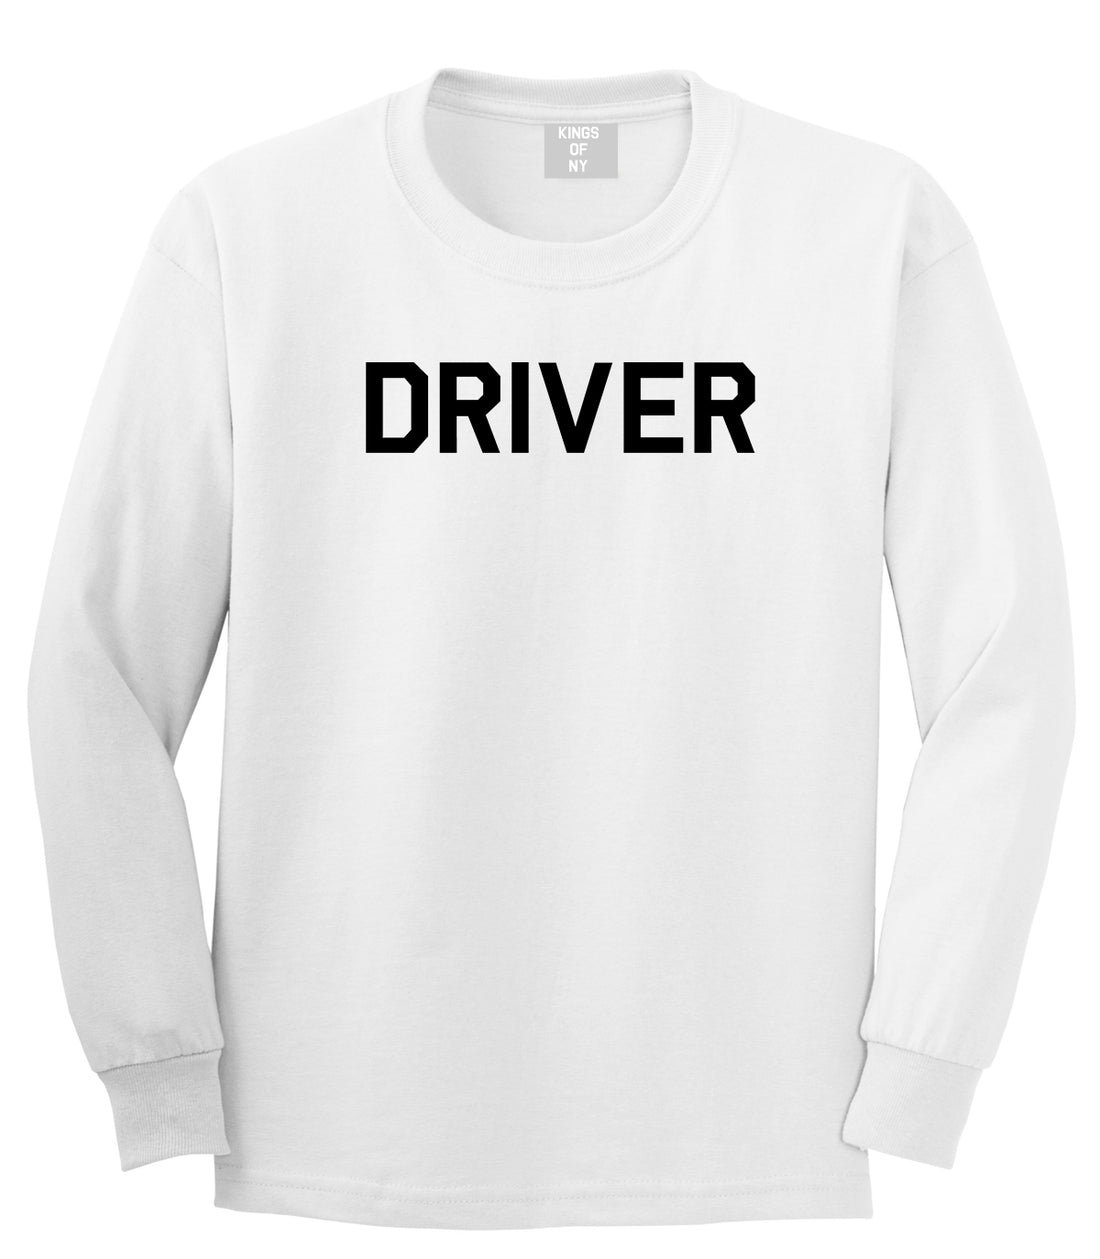 Driver Drive Mens White Long Sleeve T-Shirt by Kings Of NY